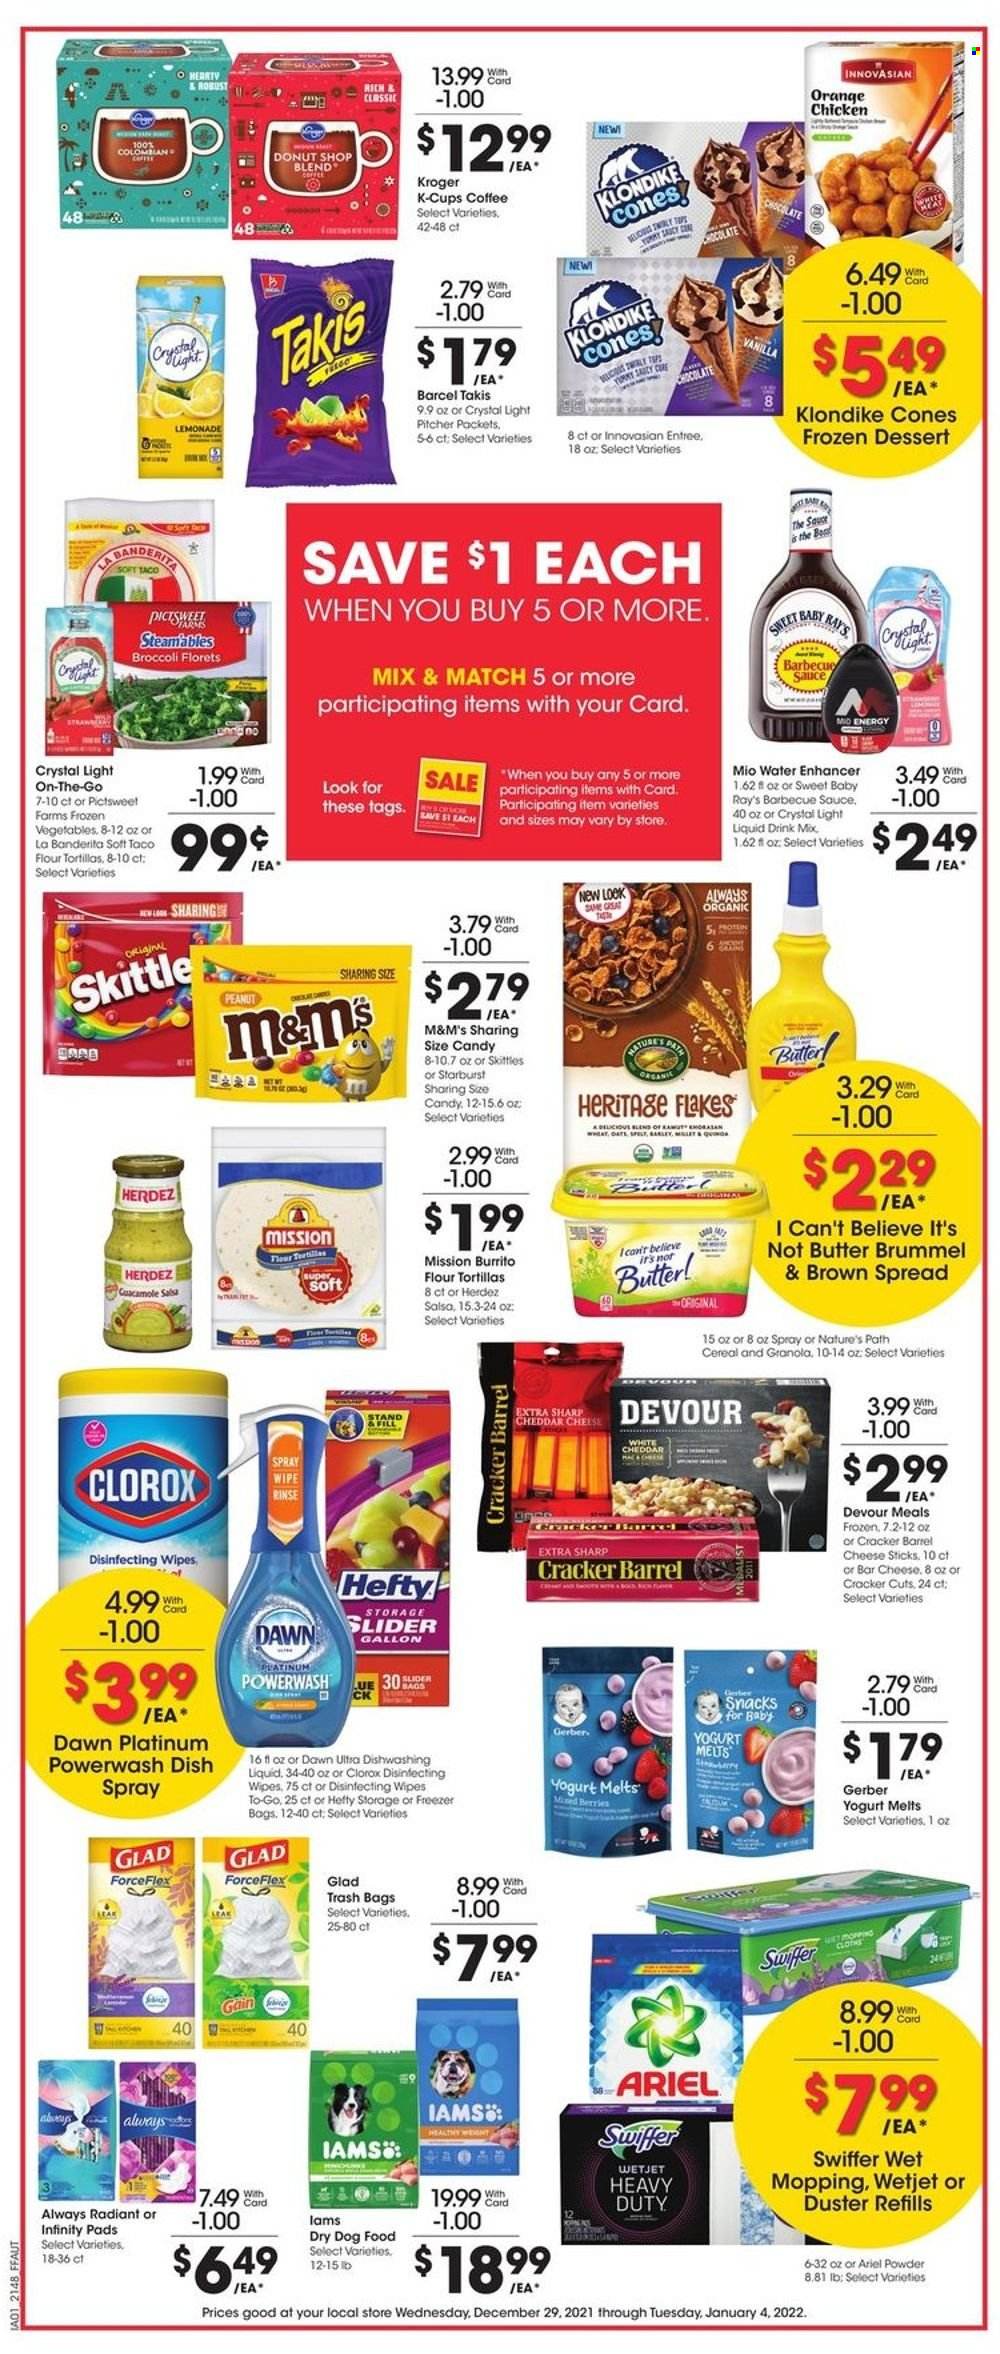 thumbnail - Fry’s Flyer - 12/29/2021 - 01/04/2022 - Sales products - tortillas, flour tortillas, broccoli, oranges, burrito, cheese, yoghurt, butter, I Can't Believe It's Not Butter, frozen vegetables, Devour, cheese sticks, chocolate, snack, M&M's, crackers, Skittles, Starburst, Gerber, cereals, granola, BBQ sauce, salsa, lemonade, coffee, coffee capsules, K-Cups, wipes, Gain, Clorox, Swiffer, Ariel, dishwashing liquid, Infinity, Hefty, trash bags, gallon, duster, WetJet, pitcher, straw, animal food, dog food, dry dog food, Iams, freezer. Page 4.